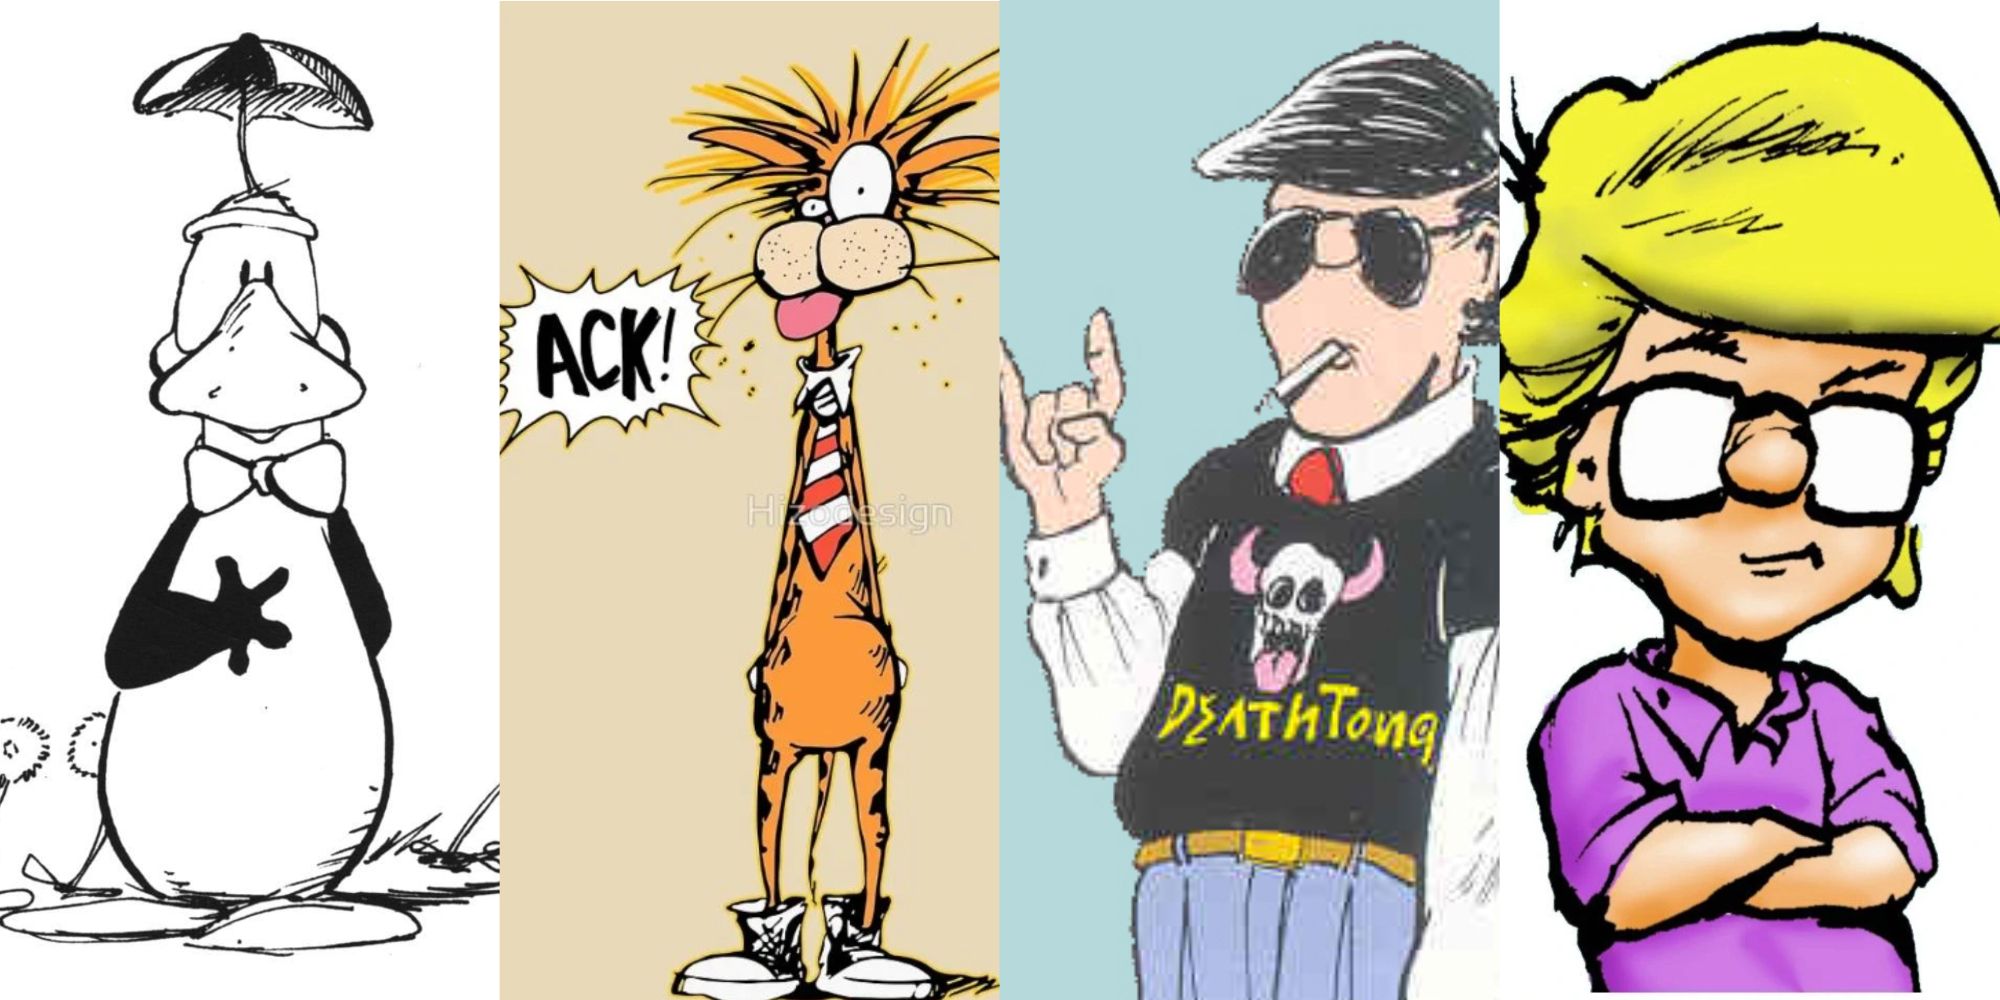 A split image of Opus, Bill, Steve Dallas, and Milo from the comic strip Bloom County is shown.